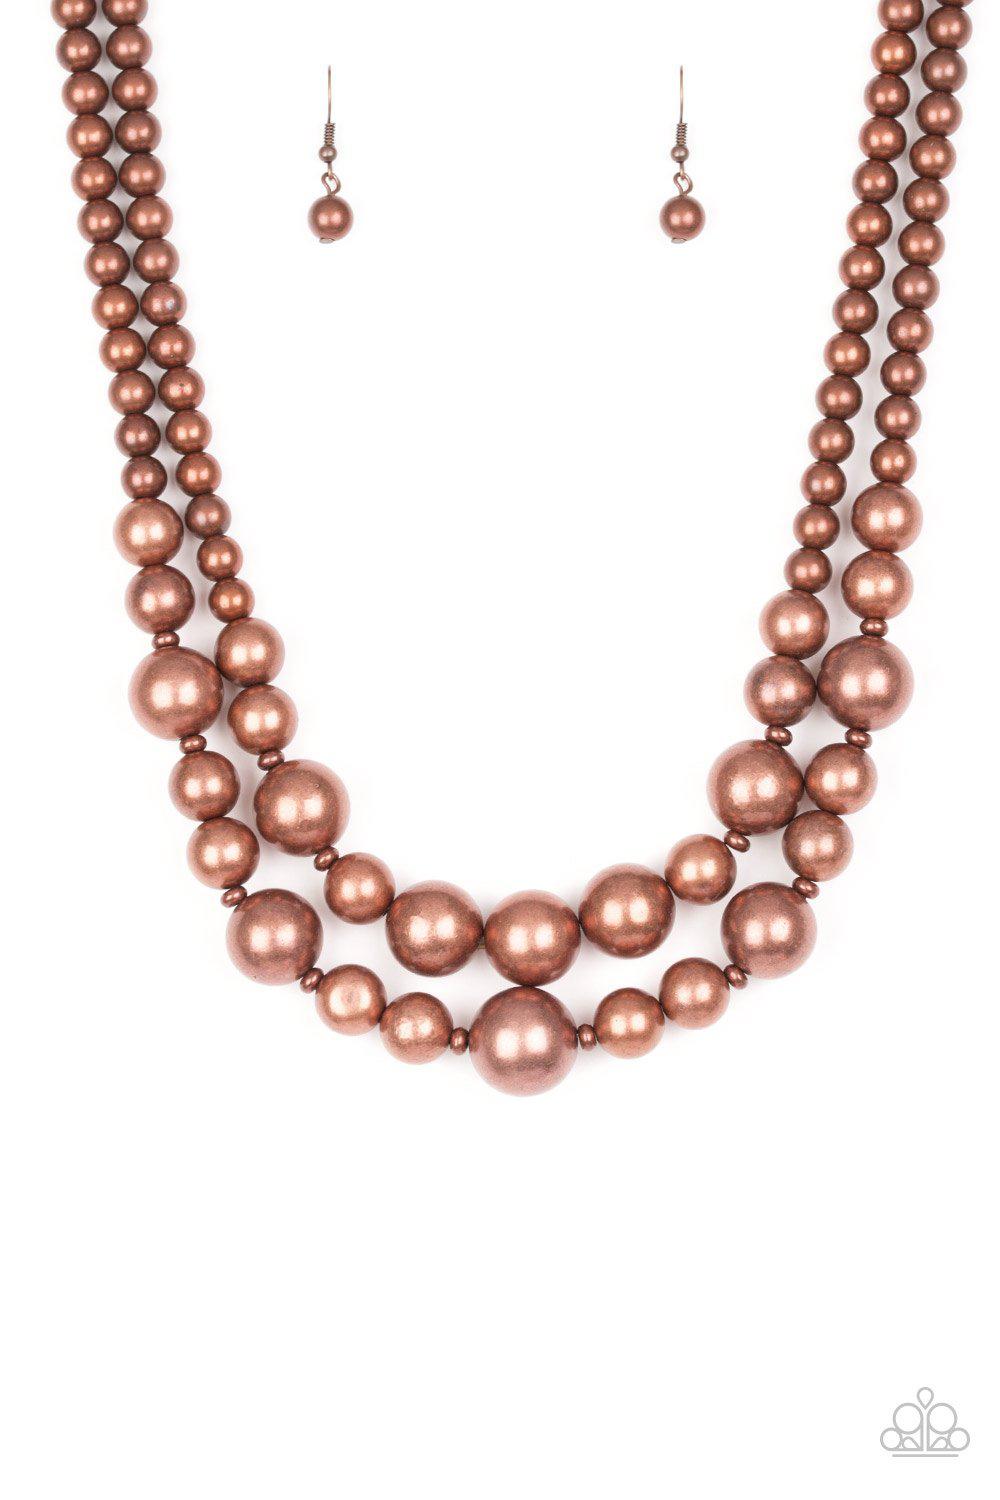 I Double Dare You Copper Pearl Necklace - Paparazzi Accessories- lightbox - CarasShop.com - $5 Jewelry by Cara Jewels